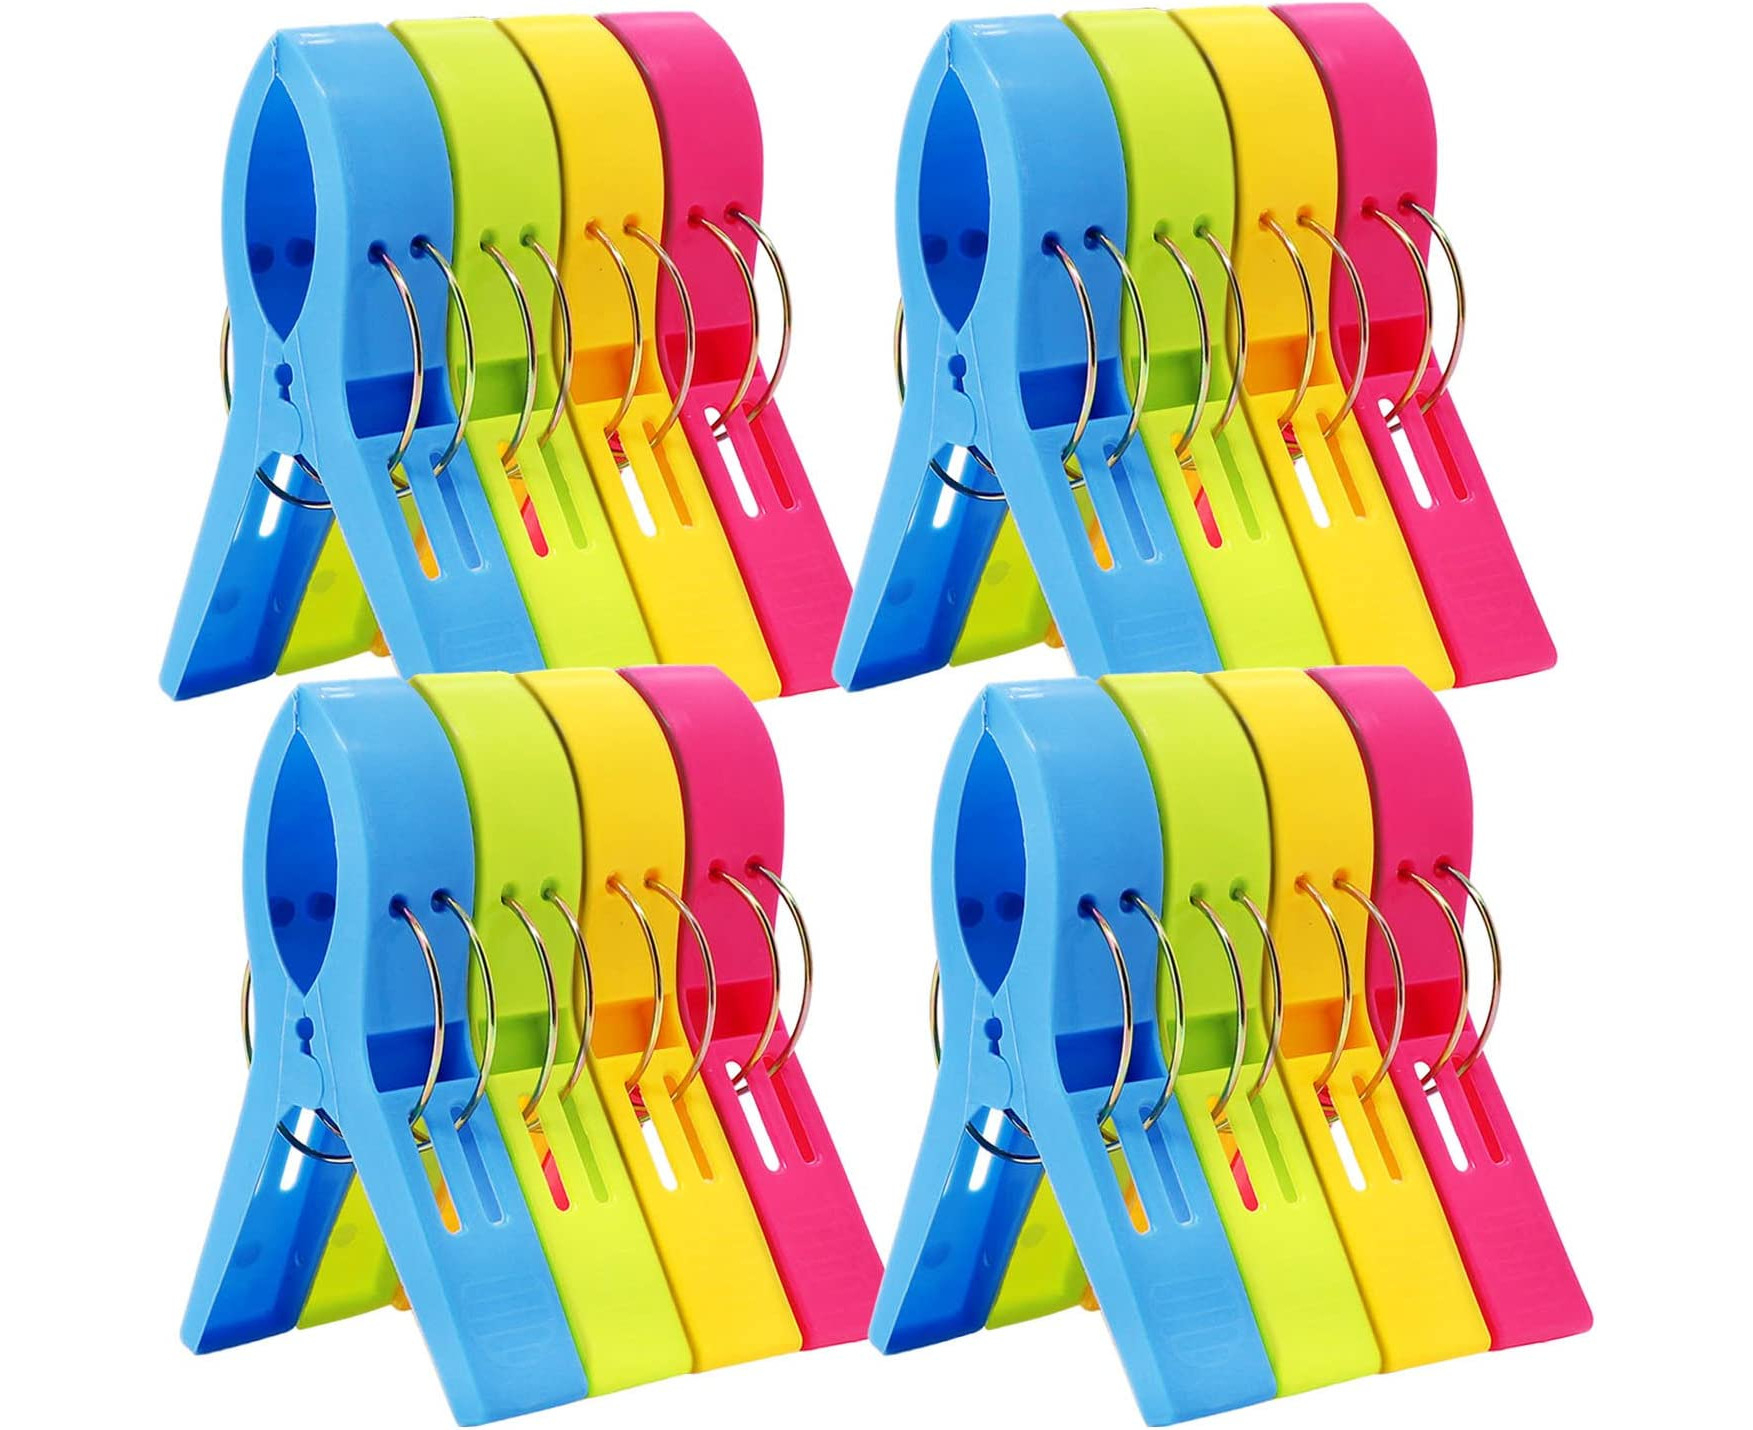 Beach Towel Clips Quilts Bright Colors Large Plastic Clip for Beach Chairs or Pool Lounges Clothes Heavy-duty Clips Keep Your Towels MINGZE 4pcs Clothes Pins Blankets From Being Blown Away 